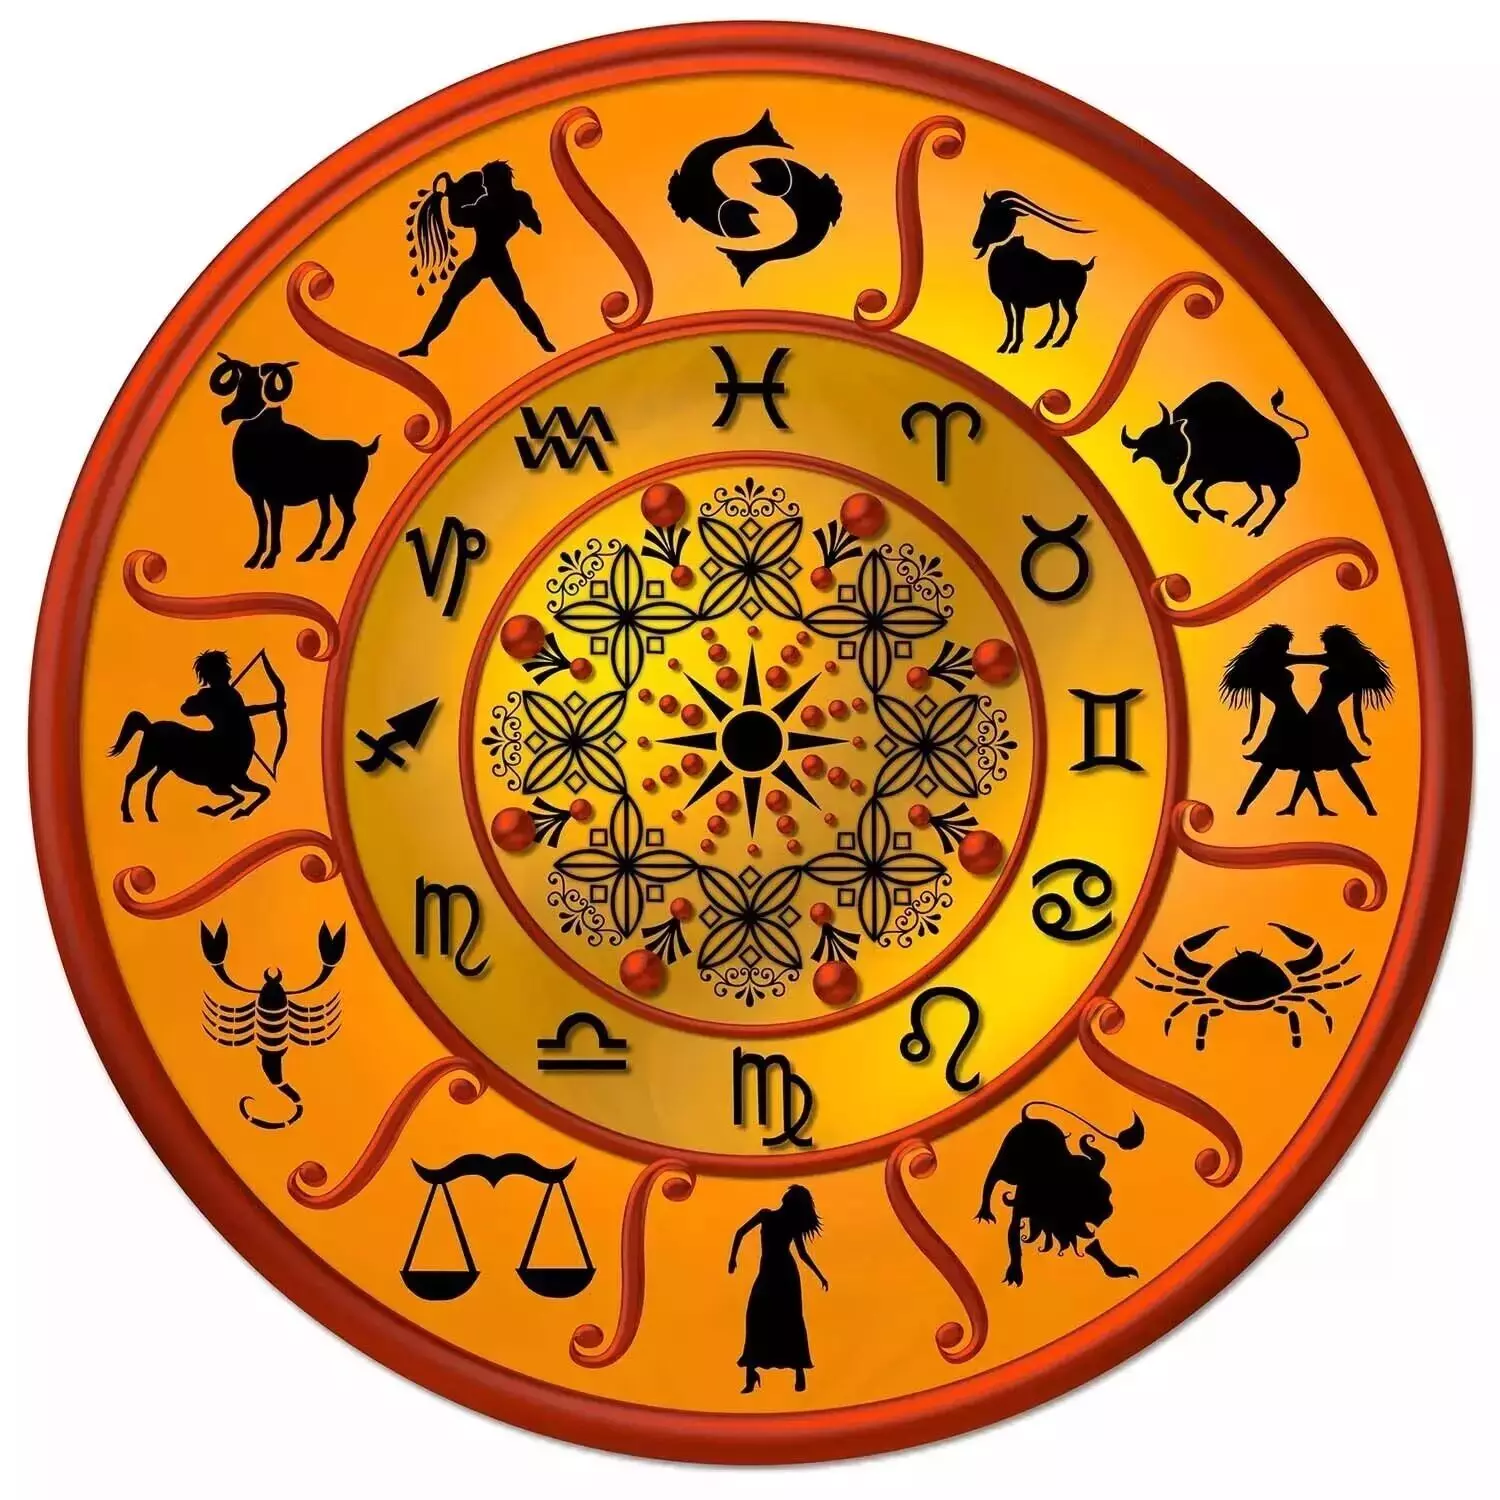 03 May – Know your todays horoscope